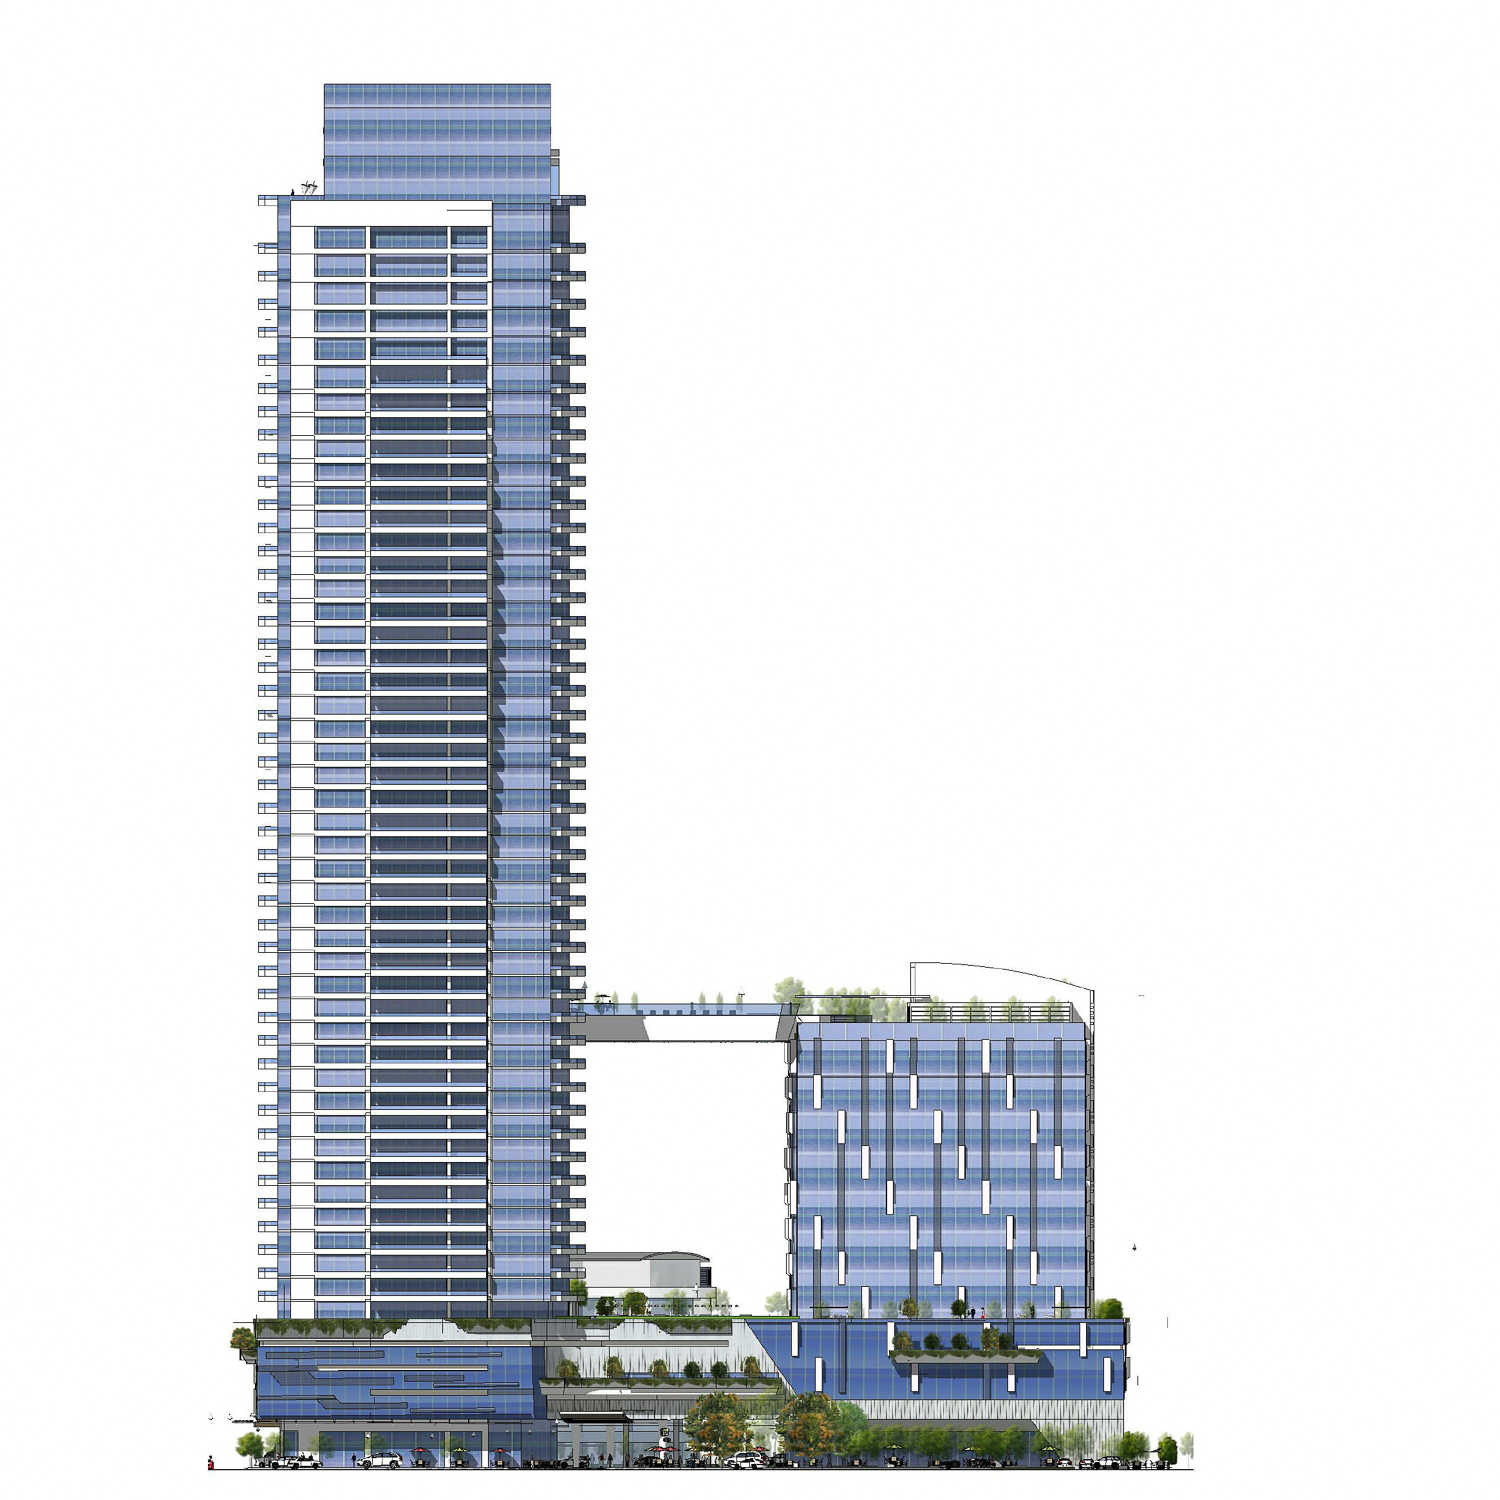 Withdrawn plans for 5801-5861 Christie Avenue east elevation, design by IBI Group